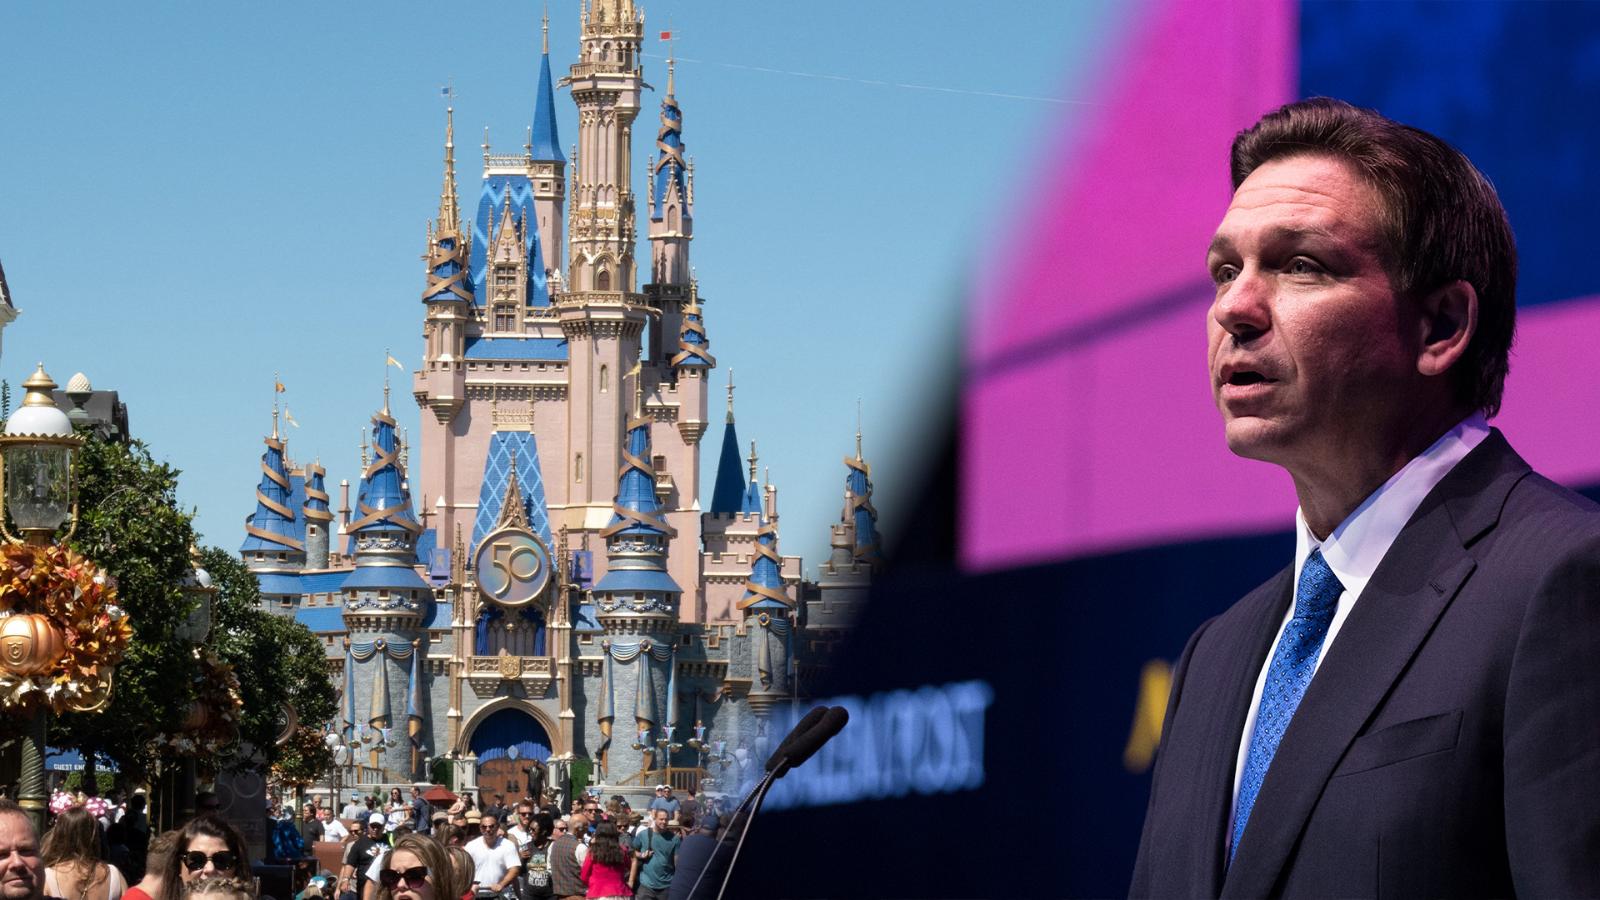 The lawsuit between Disney and Governor Ron DeSantis in Florida